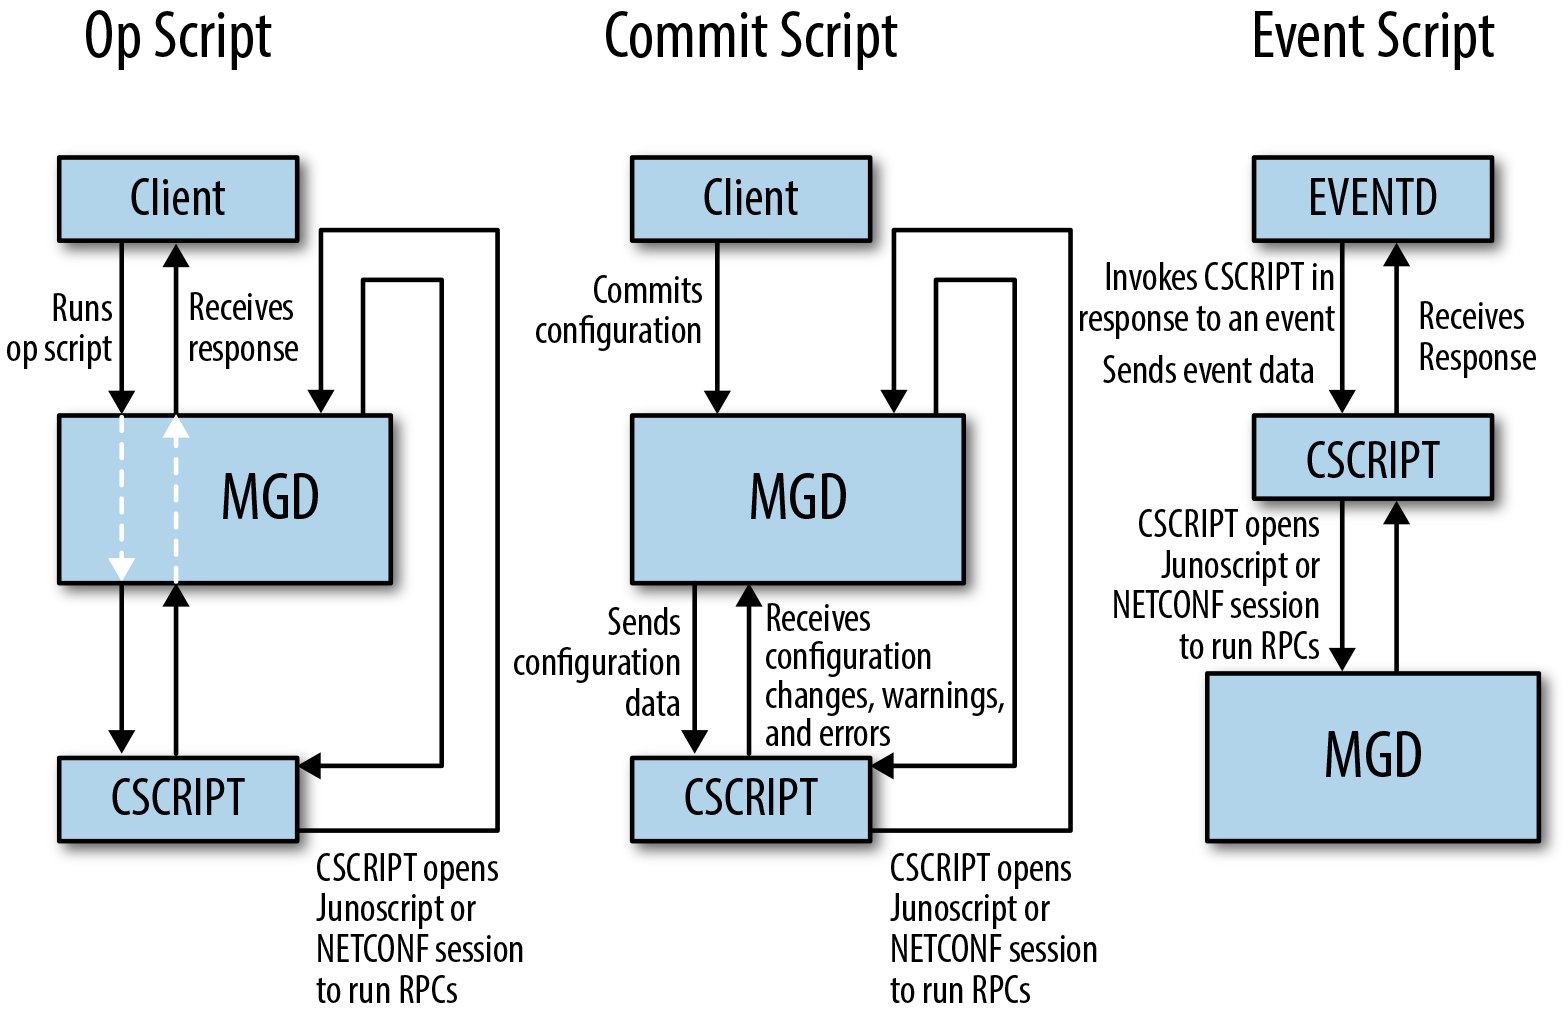 This figure illustrates the way that data flows from MGD
              or EVENTD to CSCRIPT. It also illustrates the way that CSCRIPT
              can open Junoscript or NETCONF sessions back to MGD.